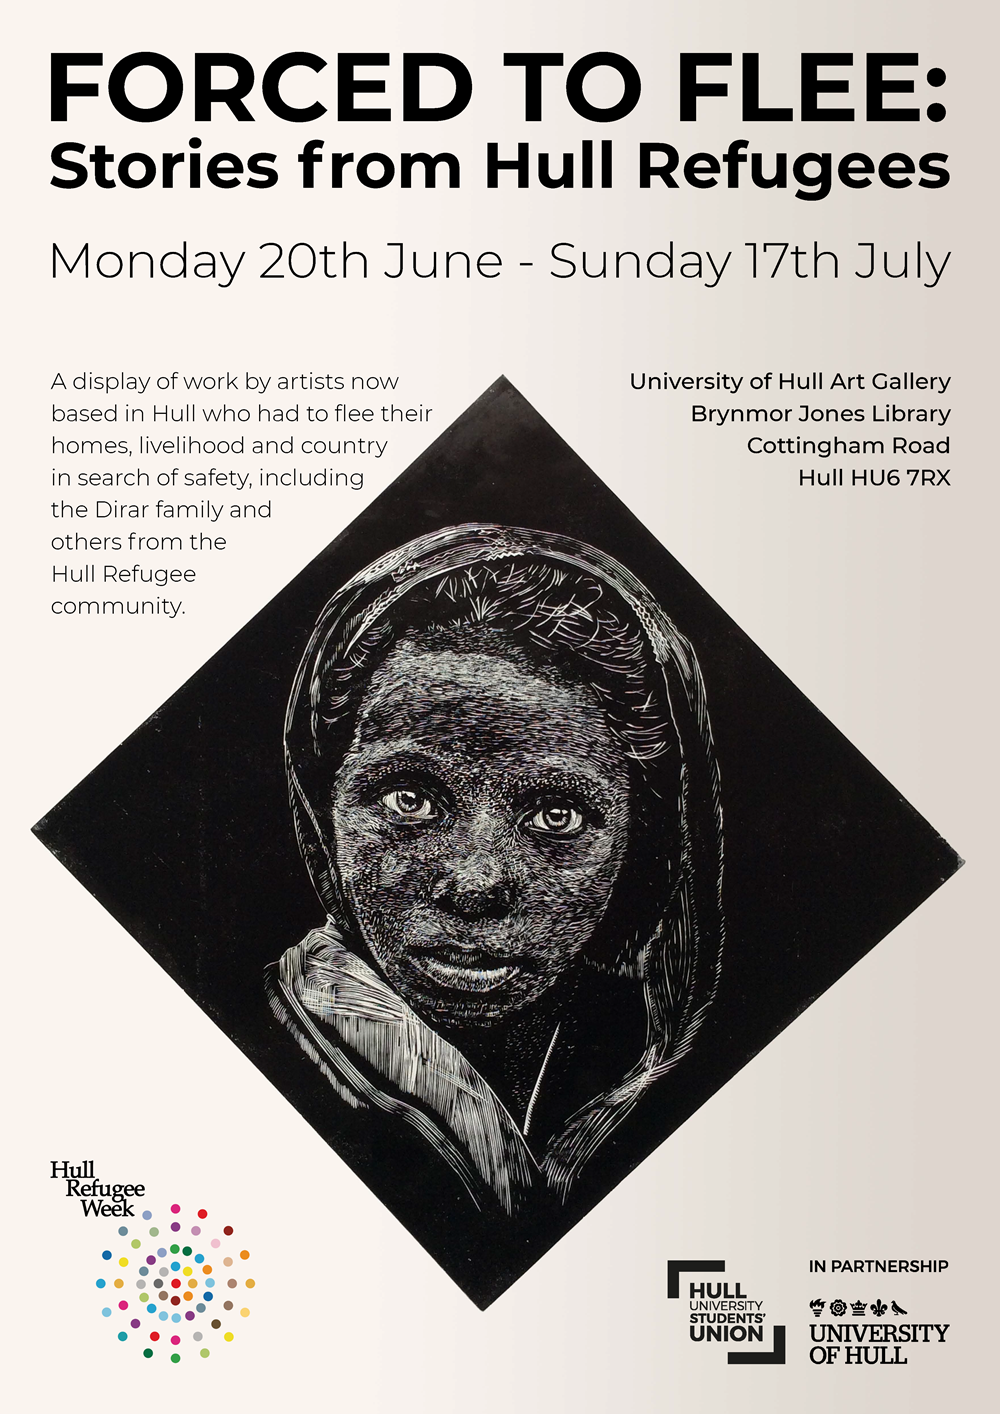 Forced to Flee, Stories from Hull refugees exhibition poster. Monday 20th June to Sunday 17th July. A display of works by artists now based in Hull who had to flee their homes. livelihood and country in search of safety, including the Dirar family and oth